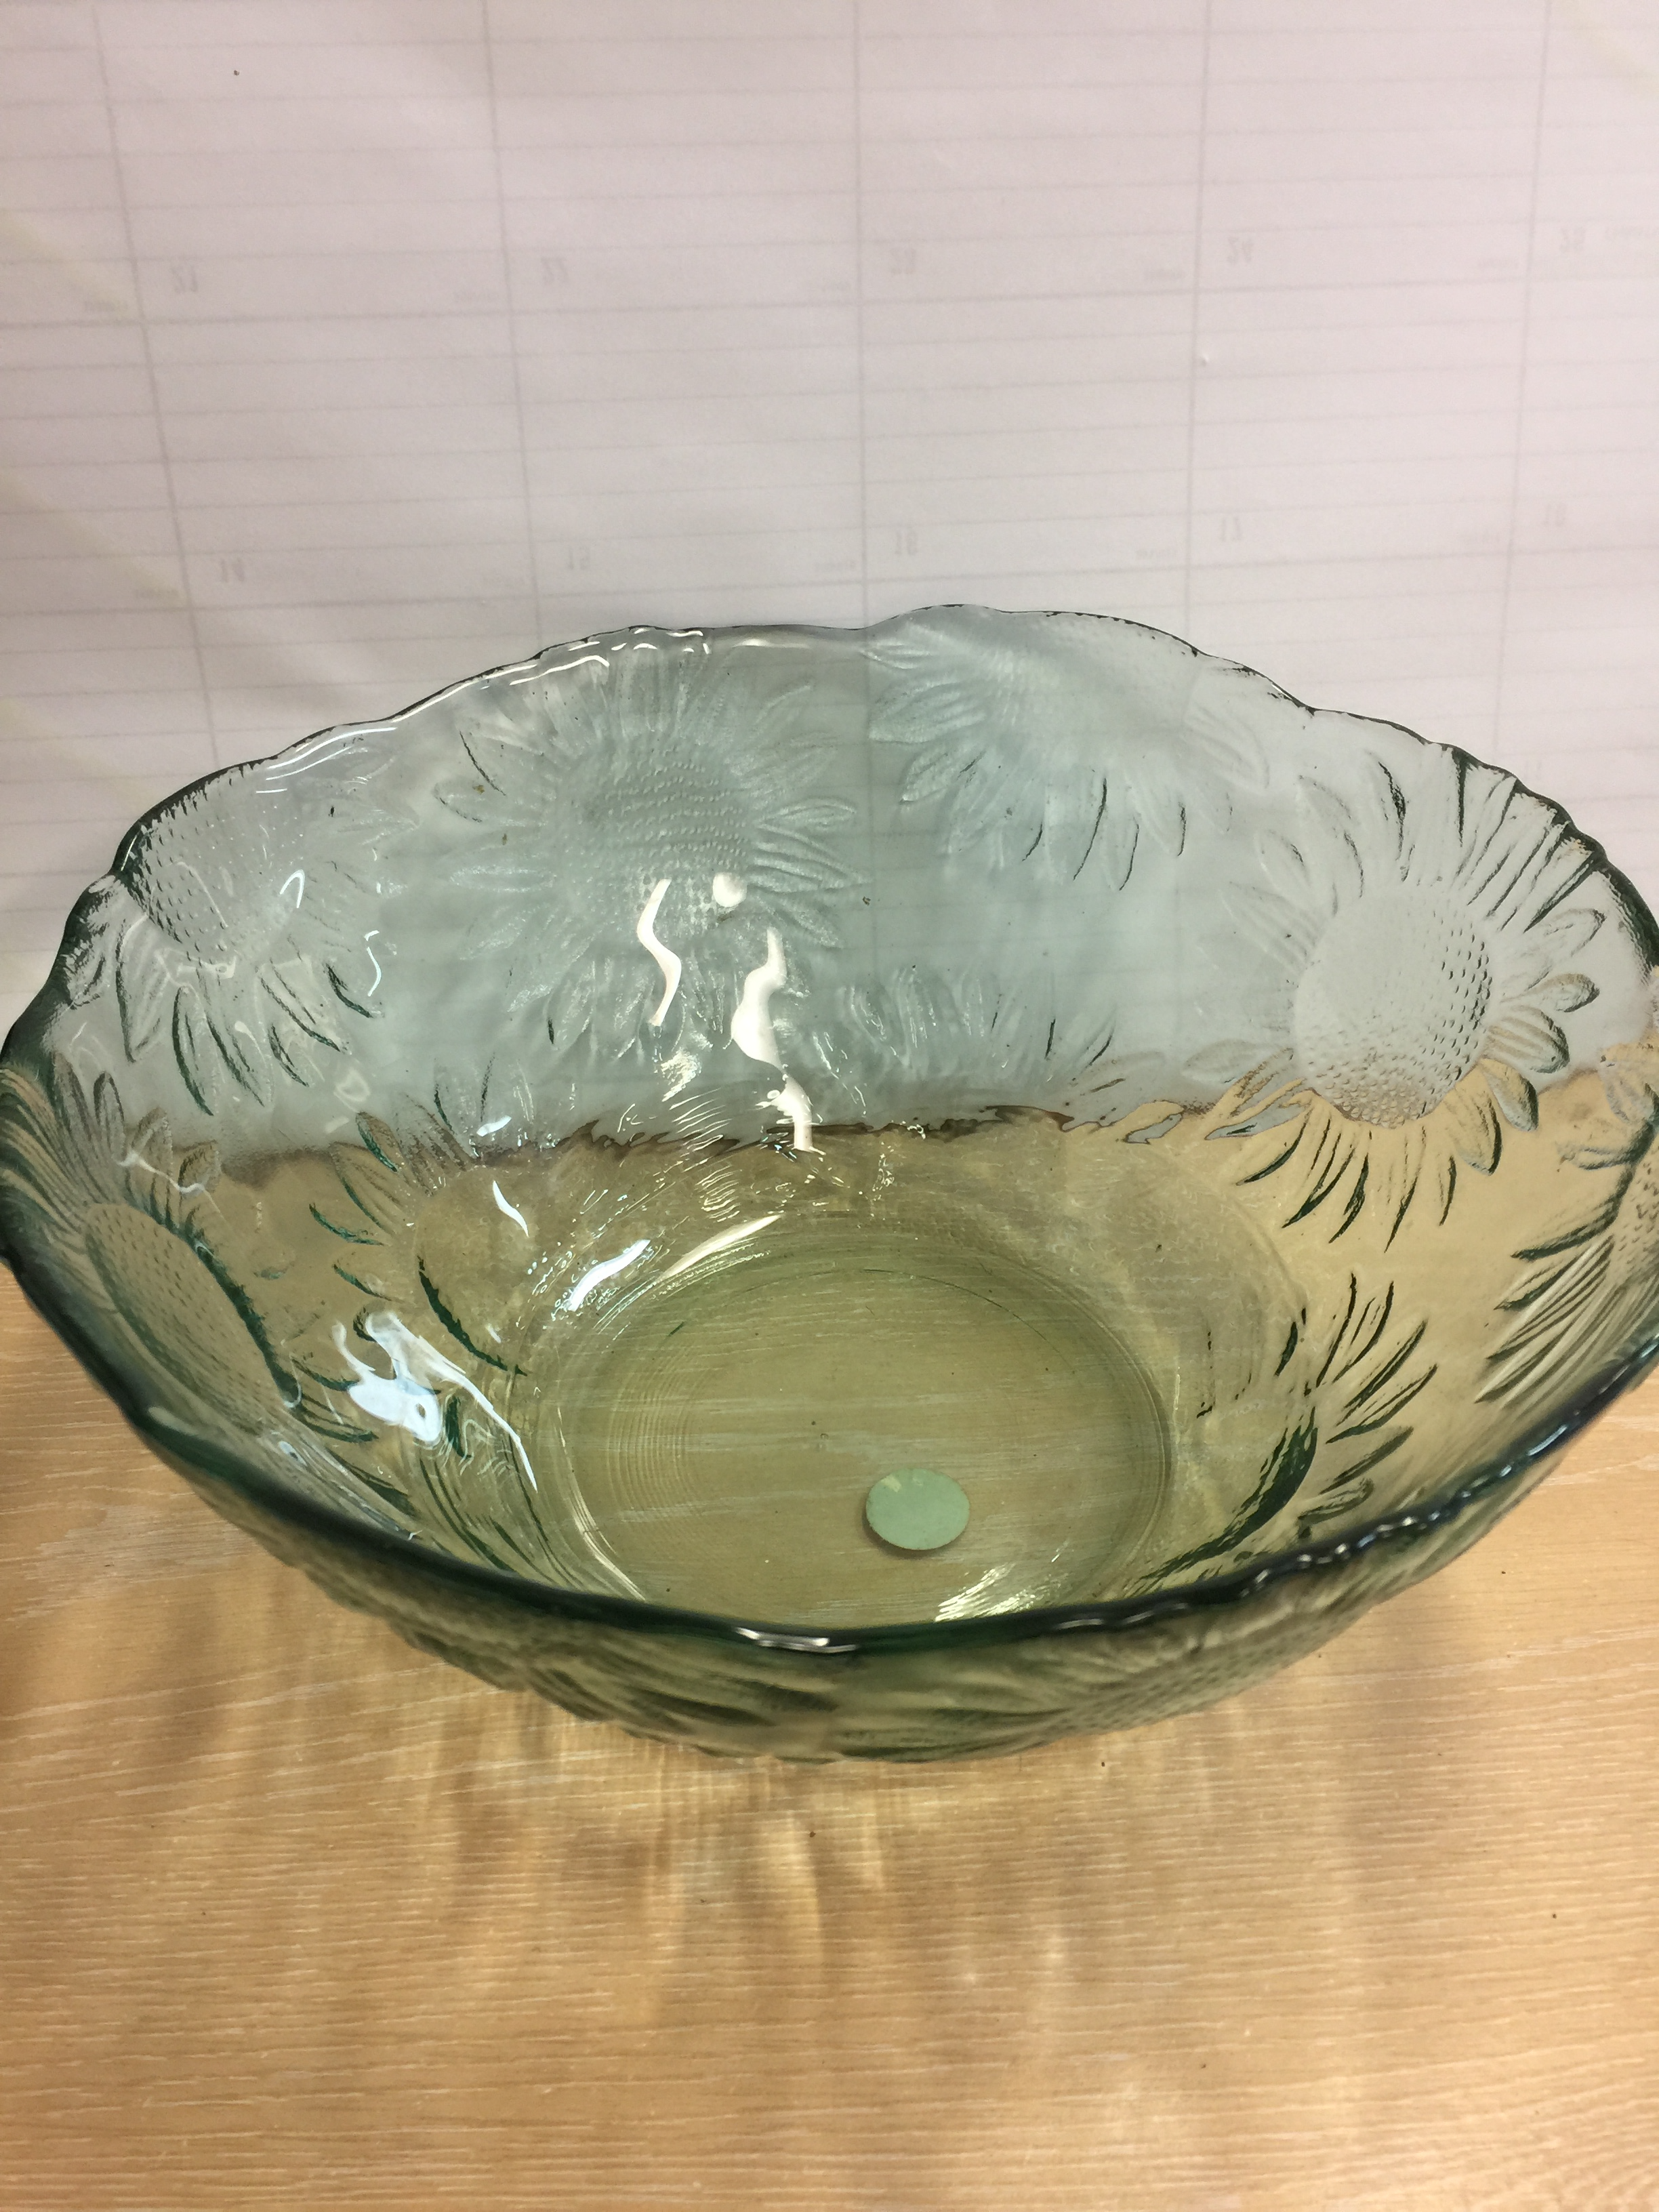 Recycled green glass bowl